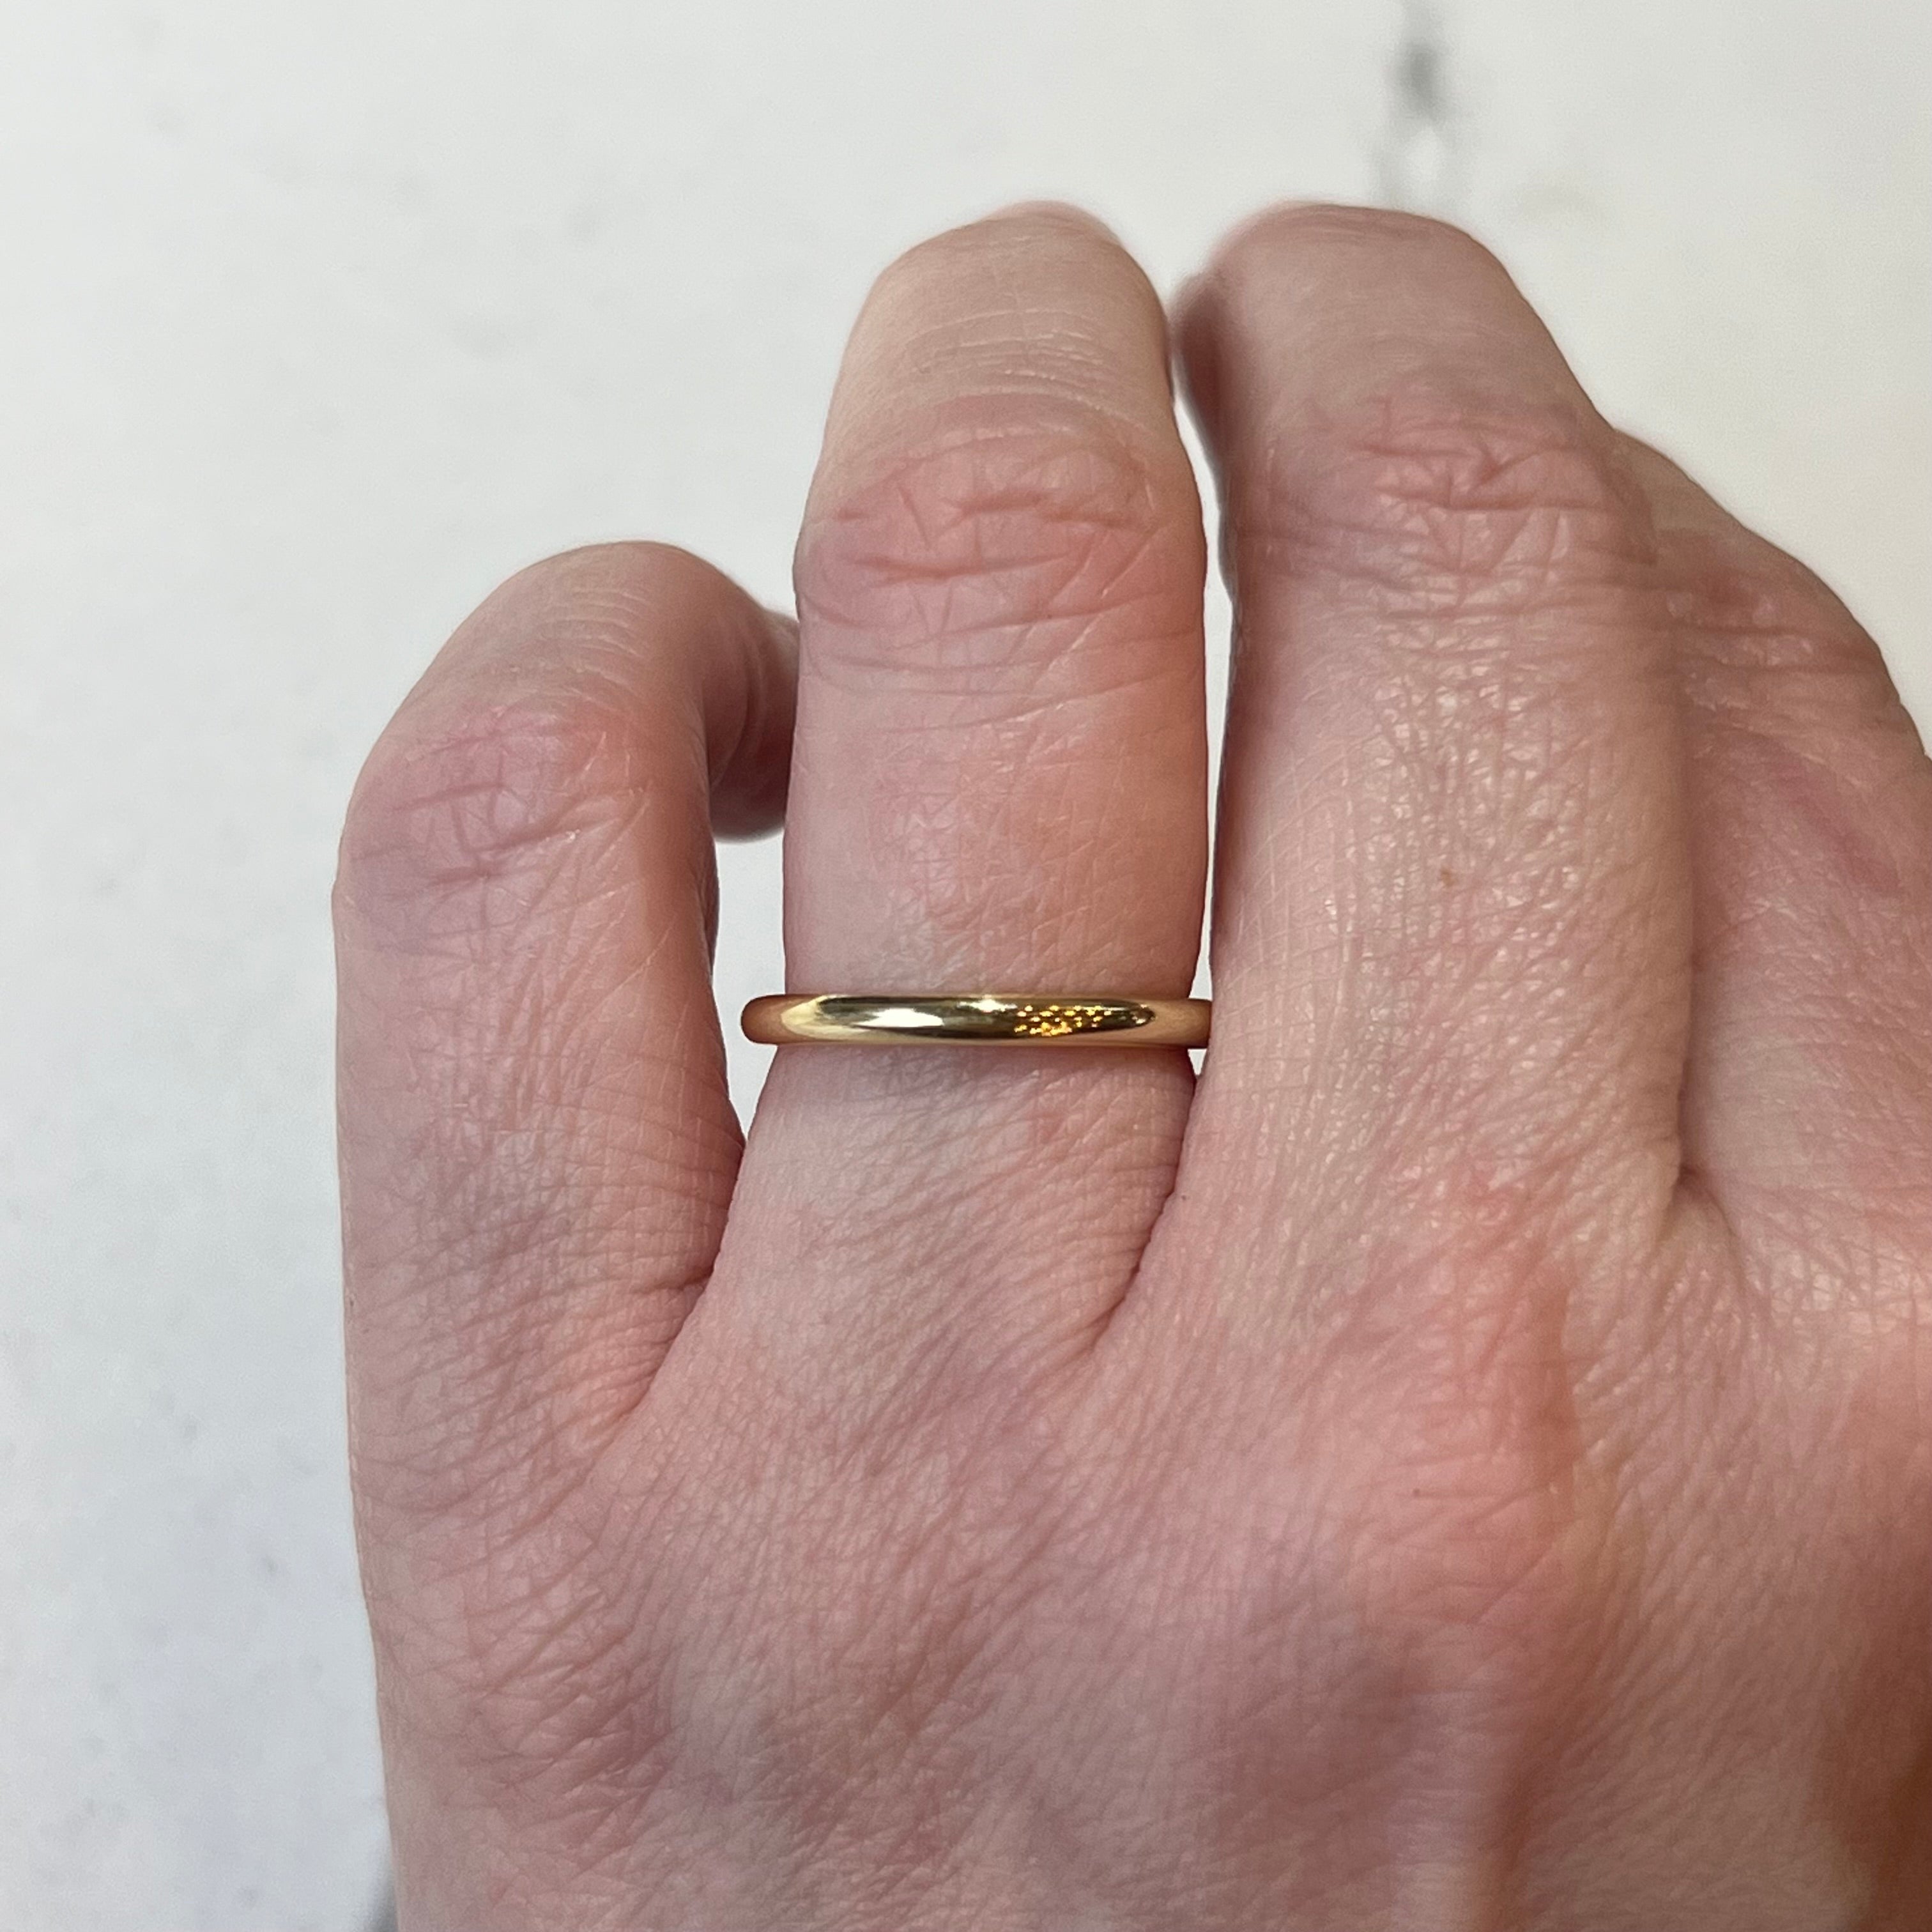 Which wedding ring style goes best with a jewelled band engagement ring? 2mm  plain, 2mm jewelled or 3mm plain (cheap amazon rings to judge the style I  want). : r/EngagementRings